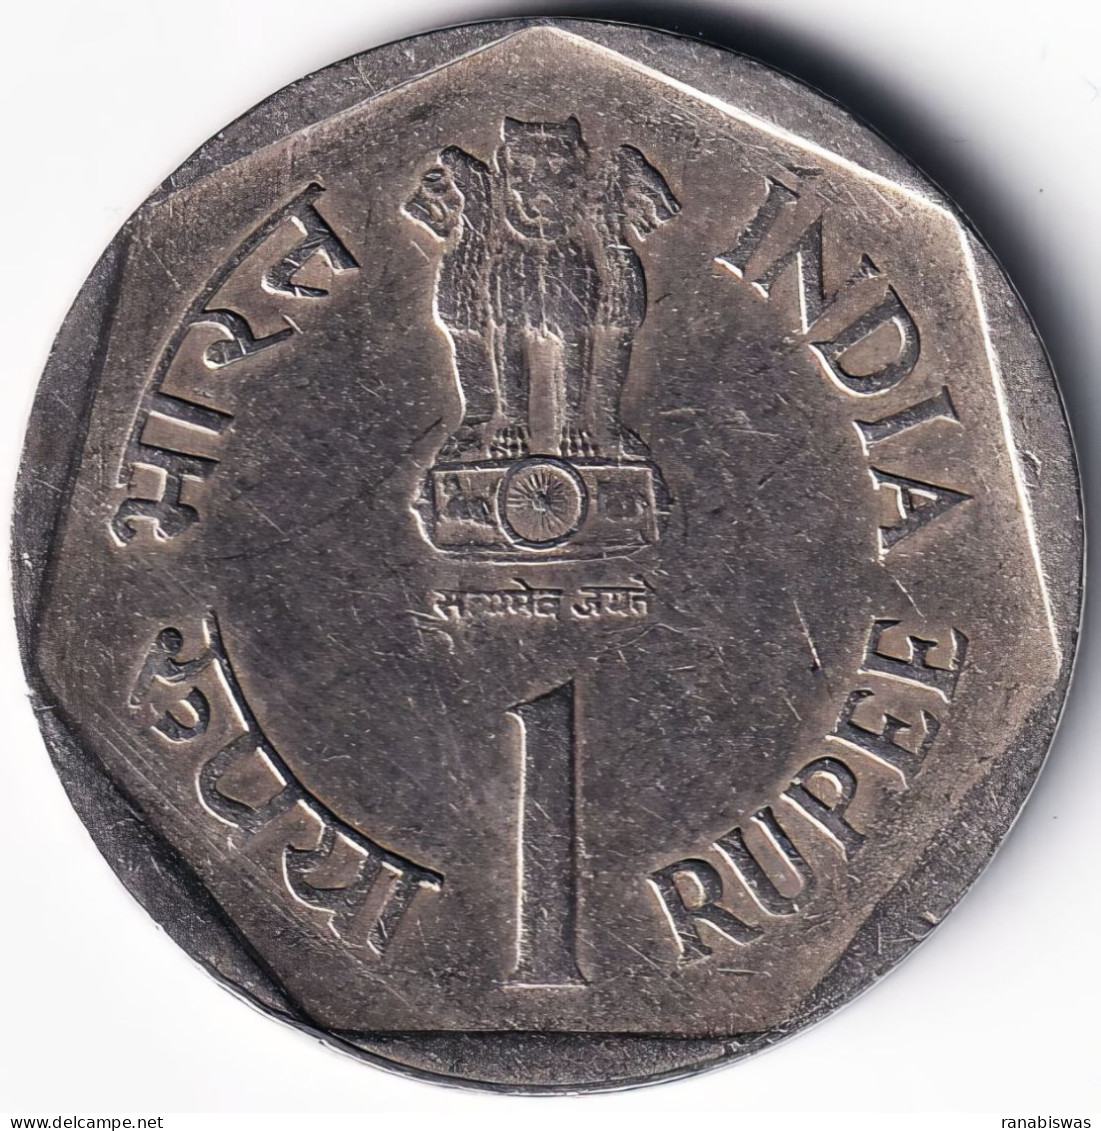 INDIA COIN LOT 112, 1 RUPEE 1987, SMALL FARMERS, HYDERABAD MINT, XF, SCARE - Indien